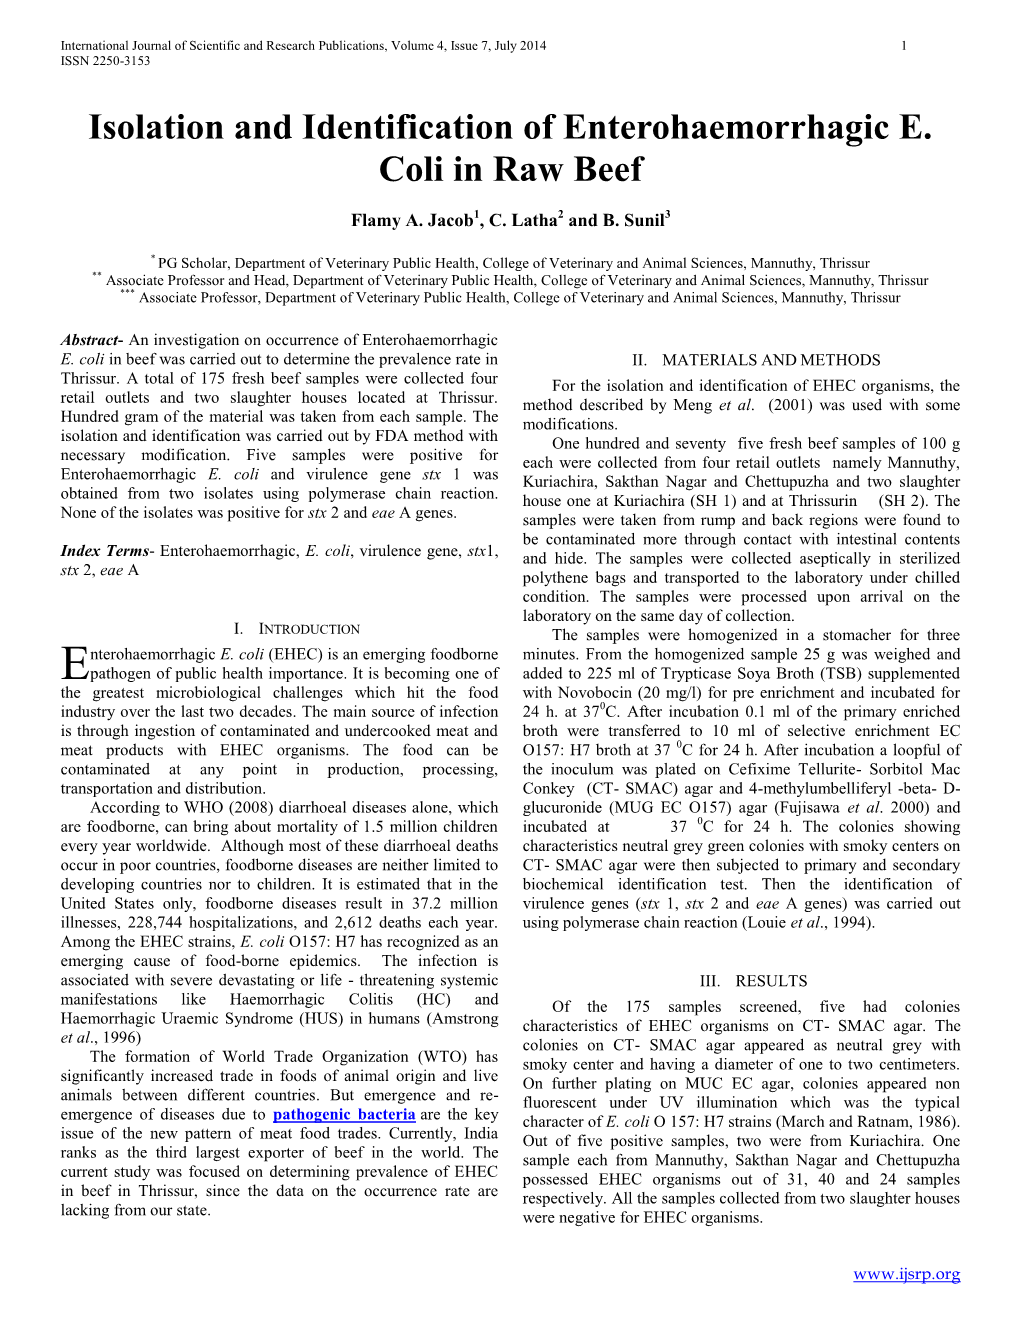 Isolation and Identification of Enterohaemorrhagic E. Coli in Raw Beef